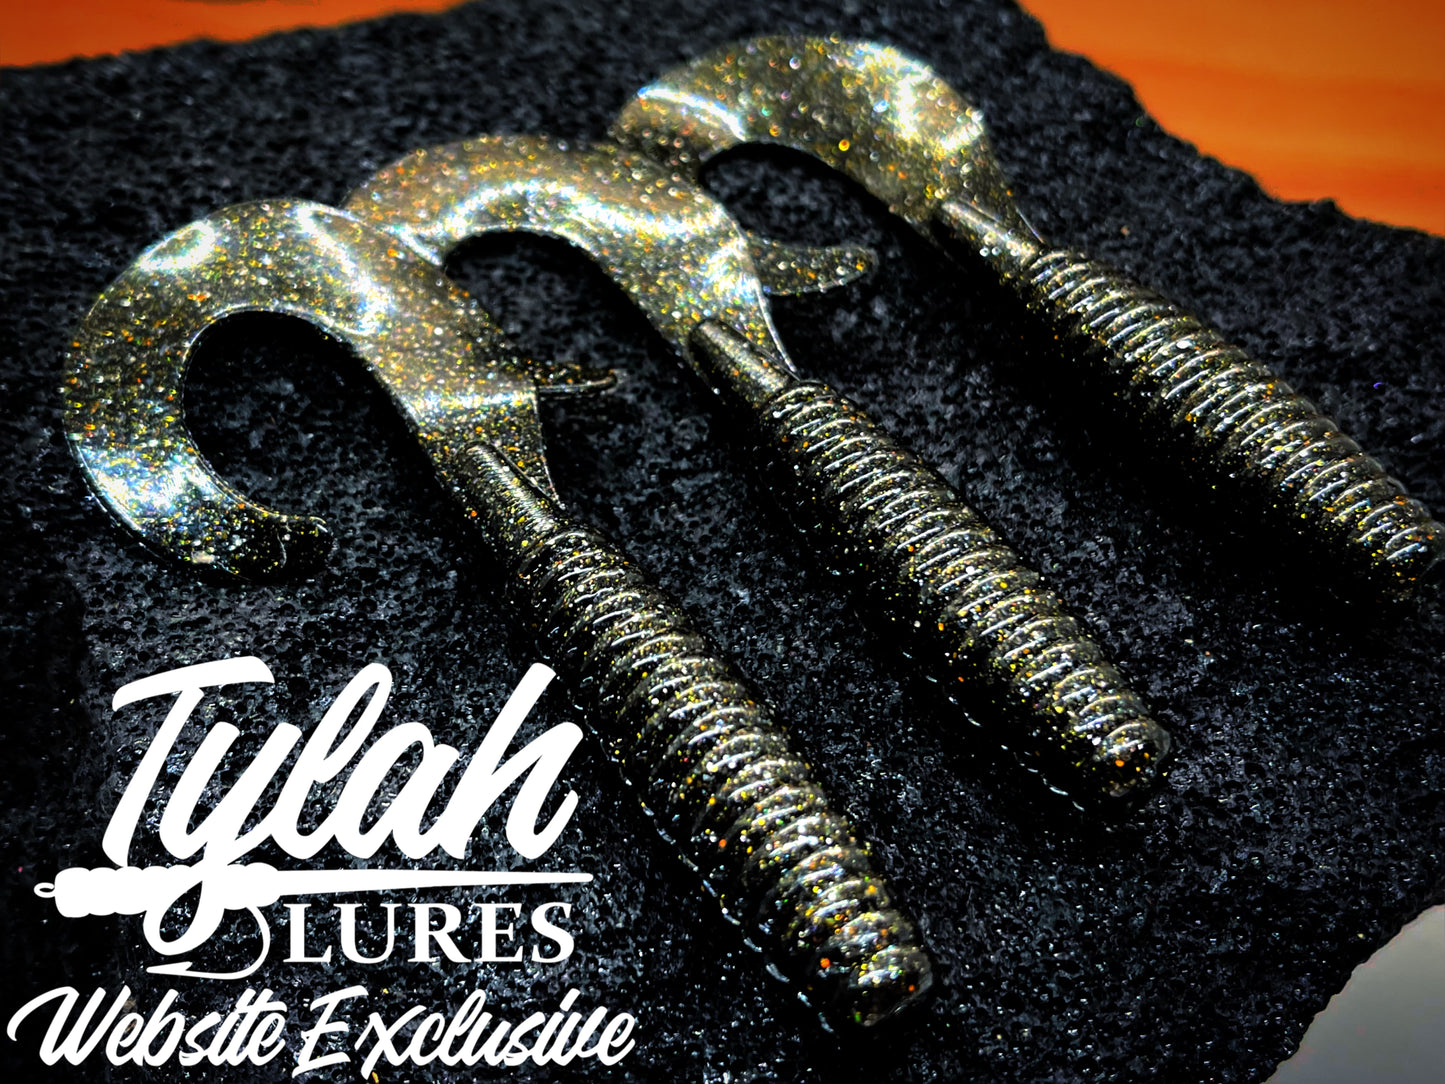 TylahLures Website Exclusive 5 inch Big TylahTail